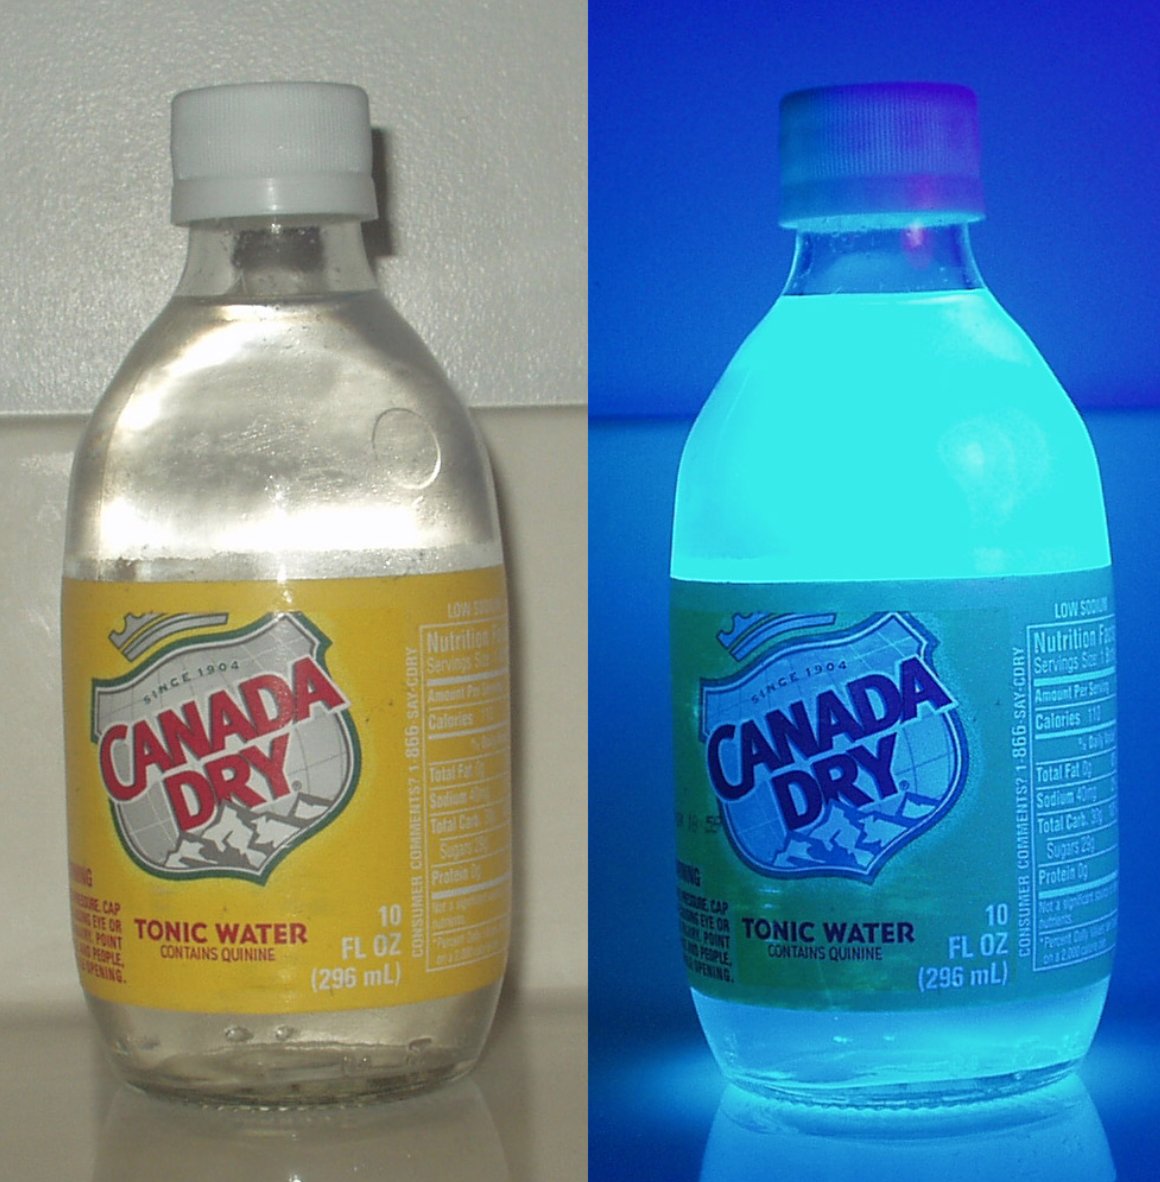 Today, tonic water produced in Japan doesn't have quinine, apparently due to costs and potential side effects, e.g. nausea, from large amounts. That's unfortunate not only because of the loss of taste and fragrance, but it also fluoresces under ultraviolet light, which is cool...